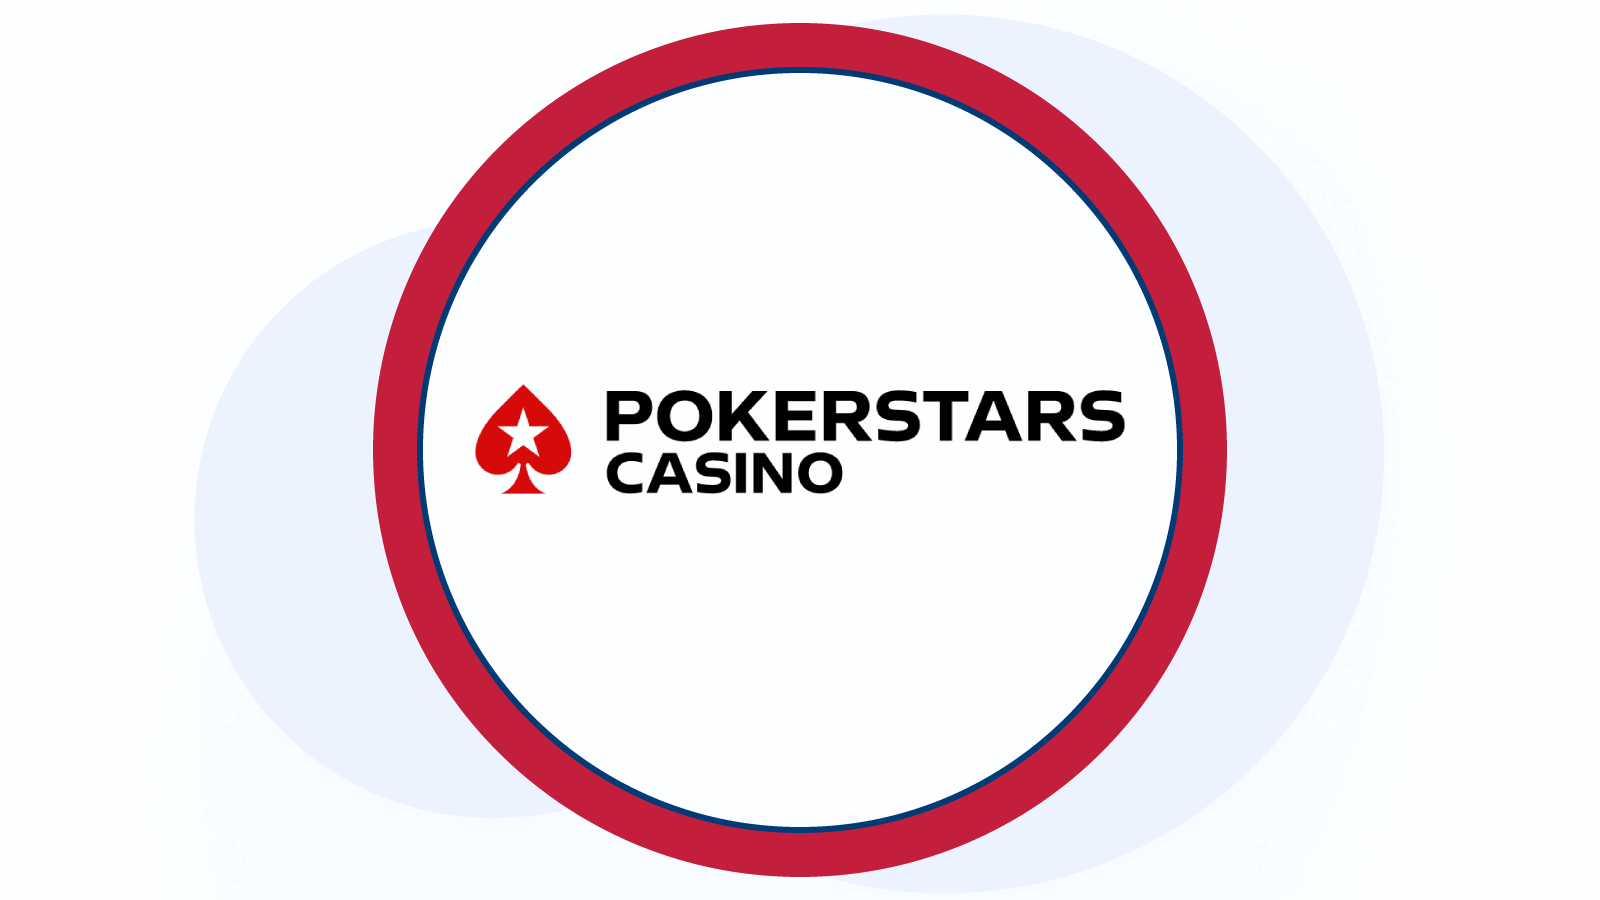 Why PokerStars Casino makes the list of the best casino sites